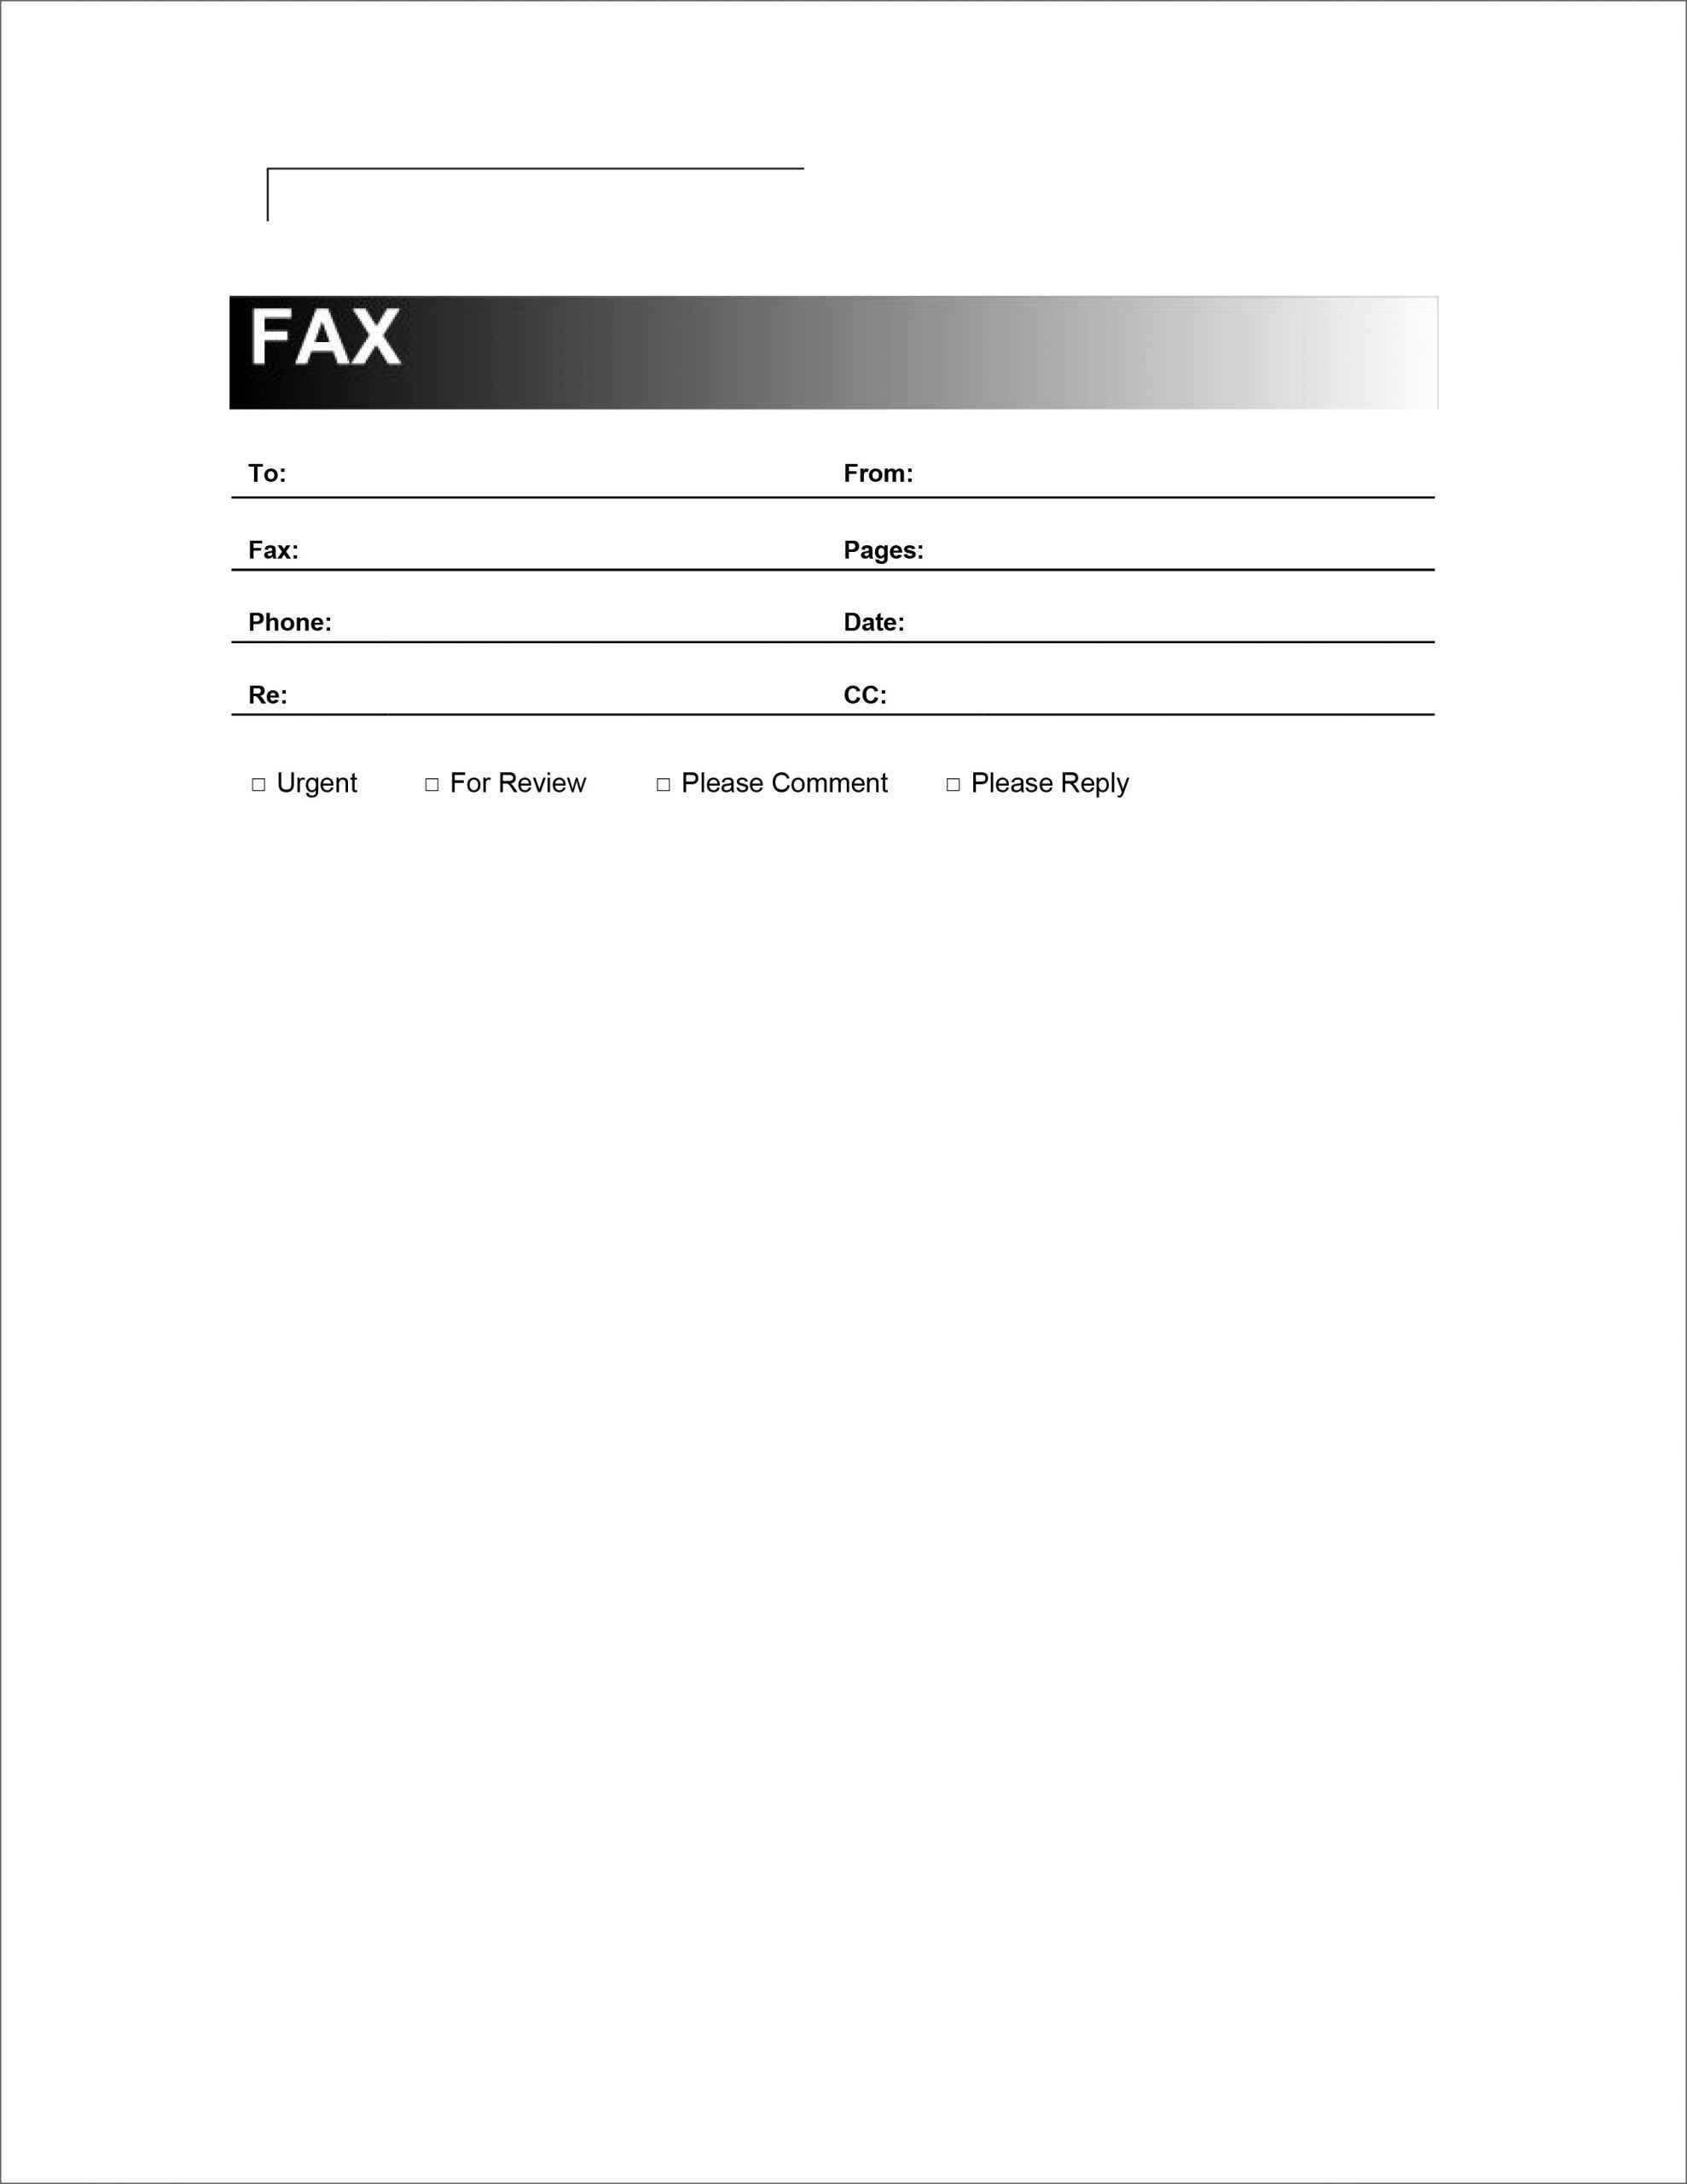 Basic Fax Cover Sheet Template Free Pdf Generic Printable Inside Fax Cover Sheet Template Word 2010